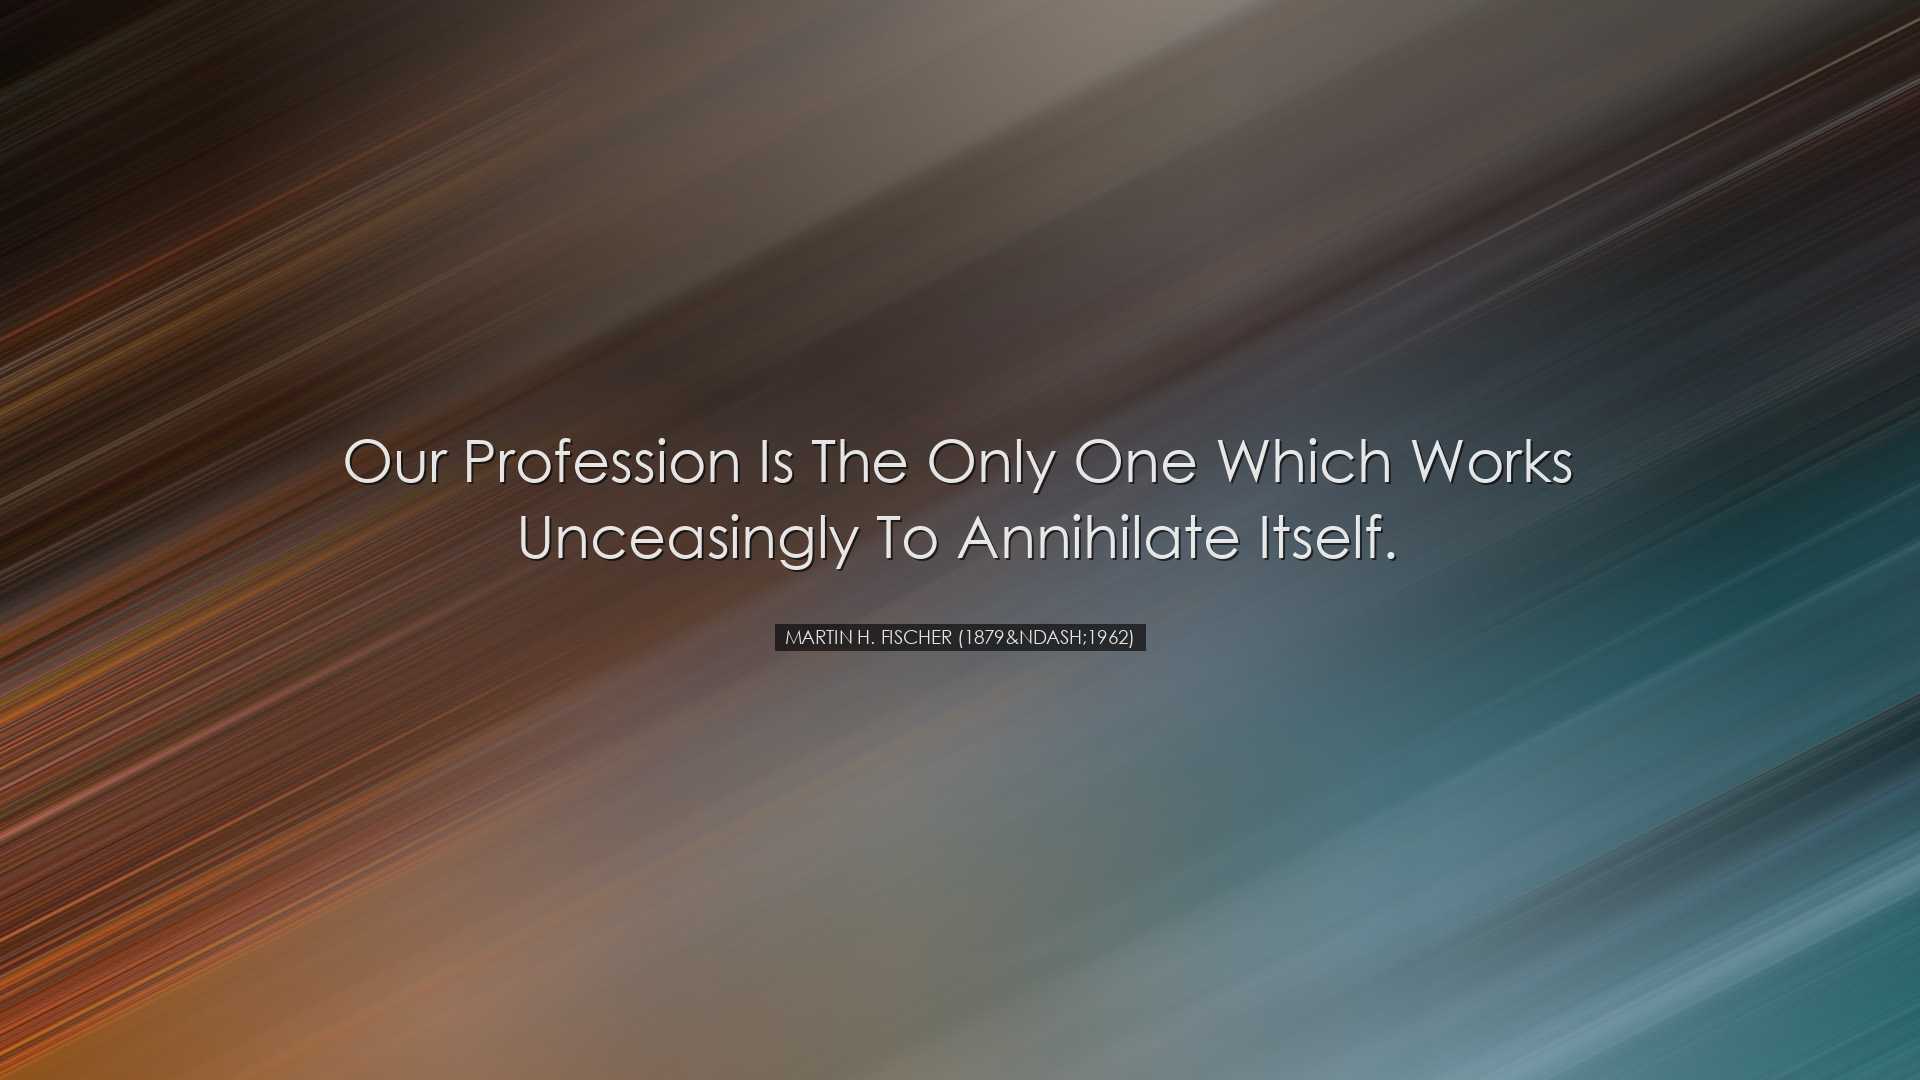 Our profession is the only one which works unceasingly to annihila